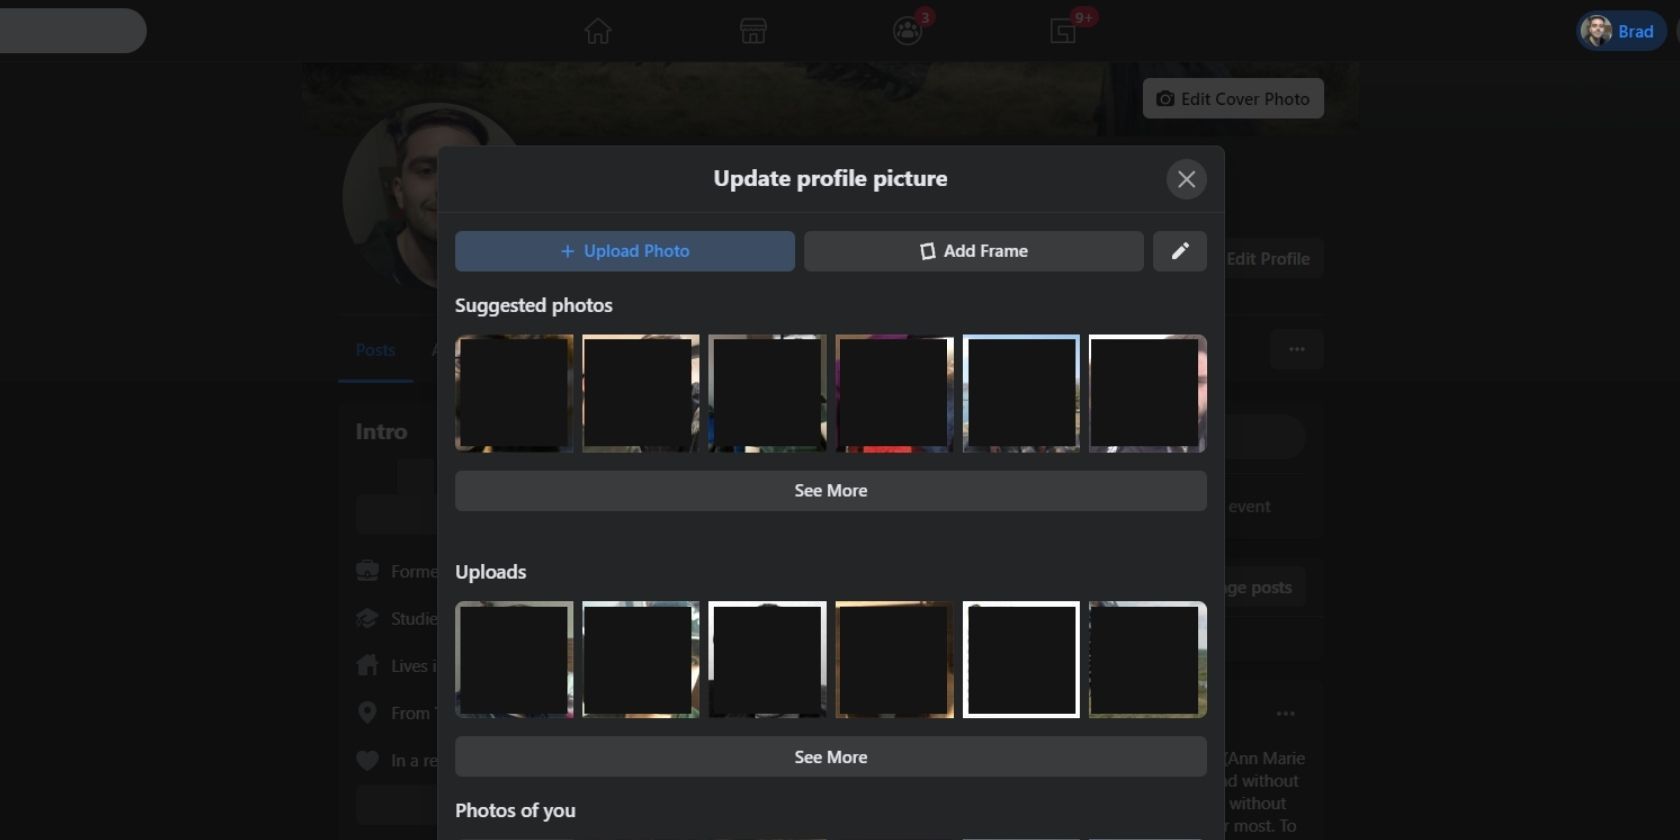 The Update Profile Picture menu on the Facebook web browser.